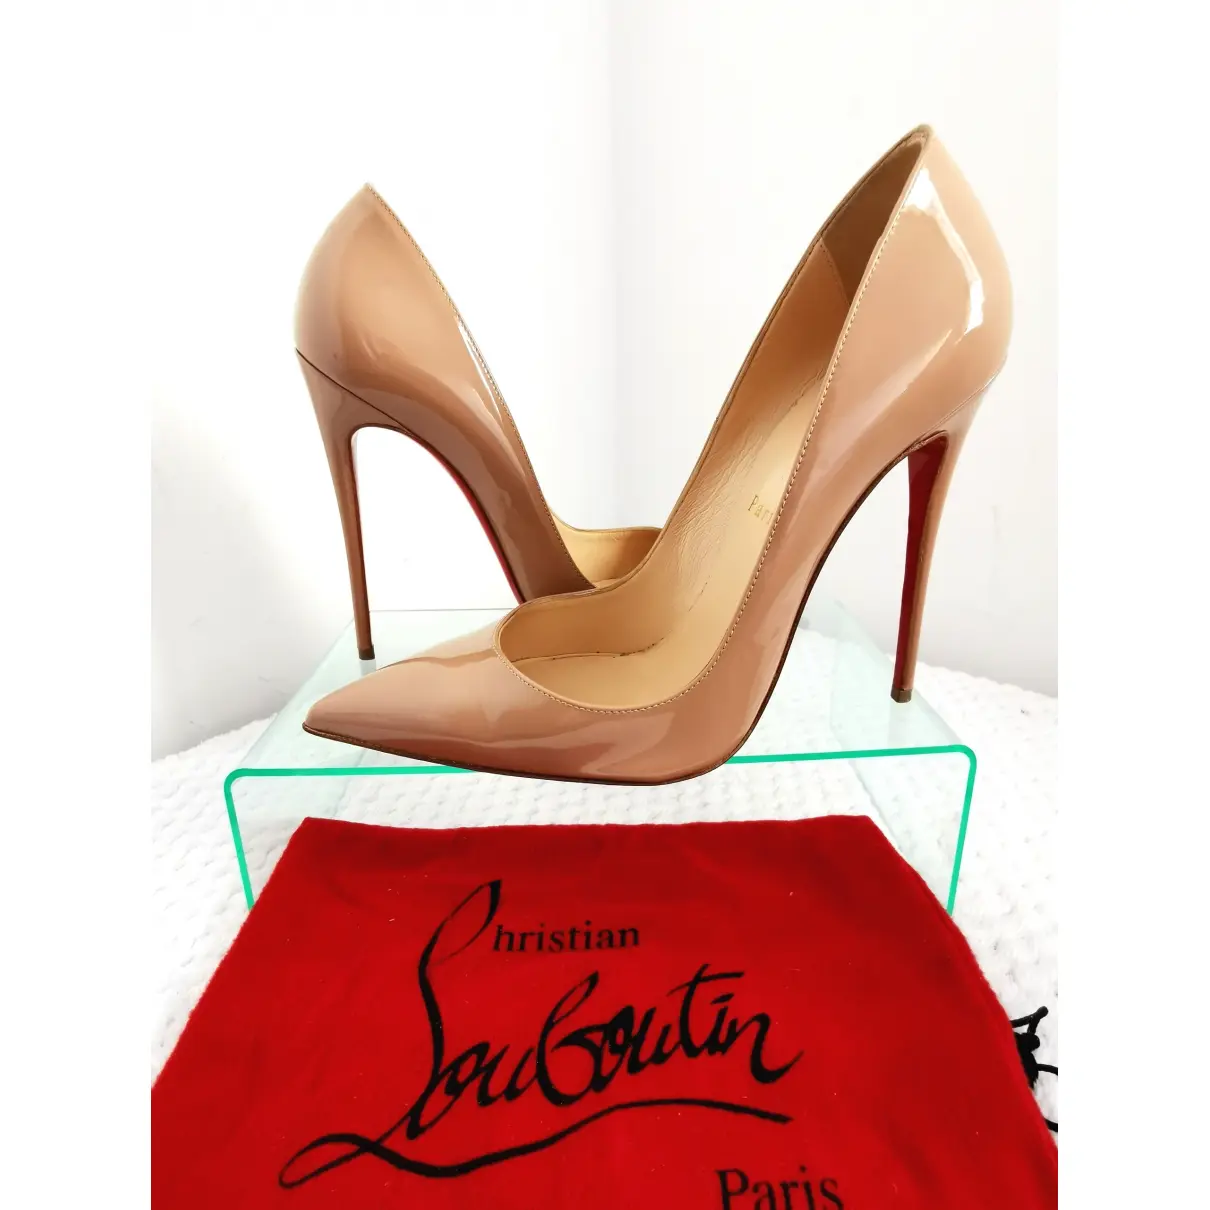 Buy Christian Louboutin Pigalle patent leather heels online